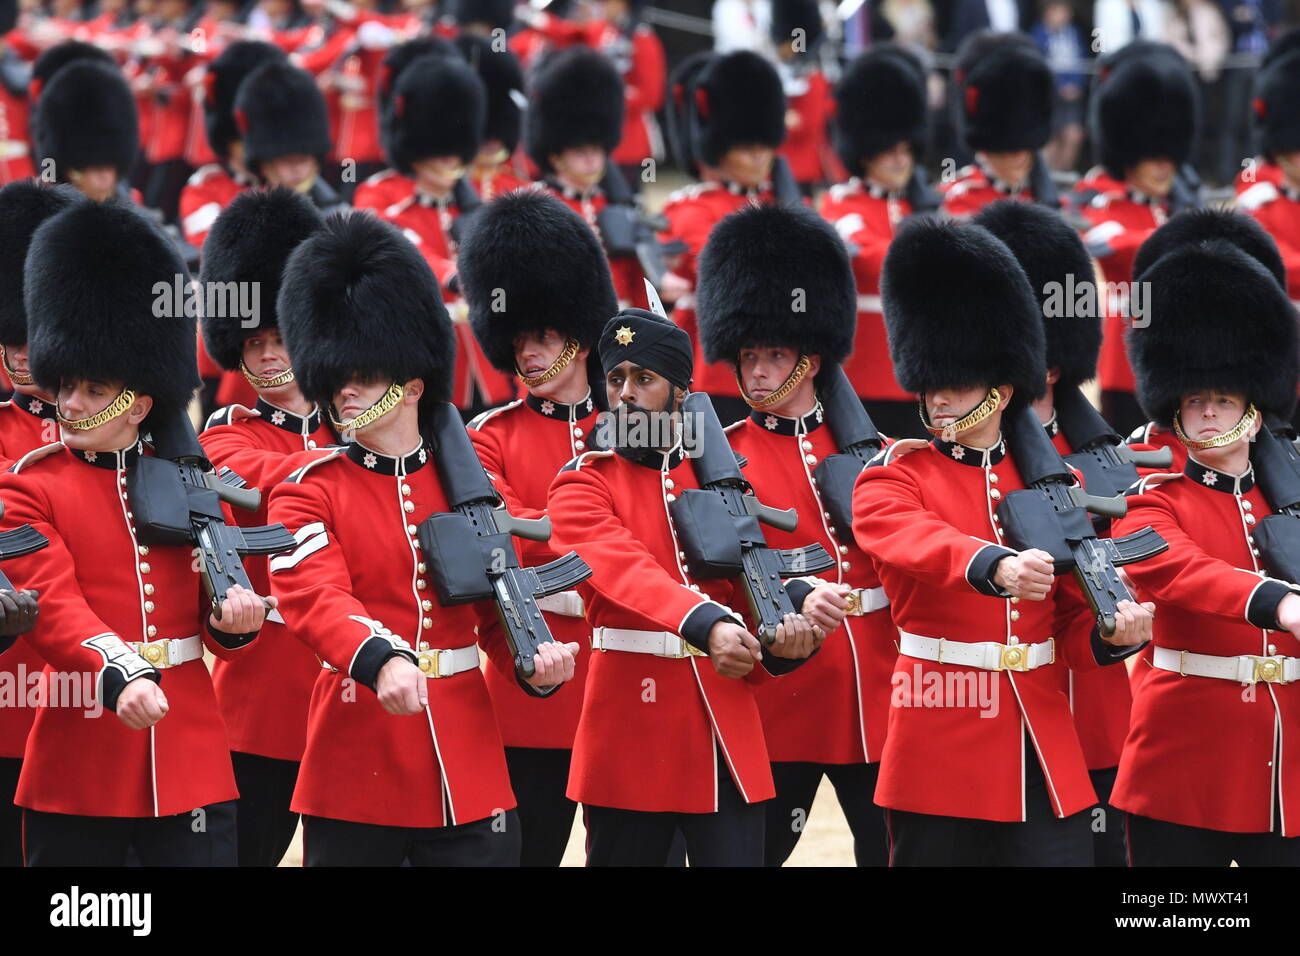 A Sikh member of the Coldstream Guards wearing a turban as he takes part in the Colonel's Review, the final rehearsal for Trooping the Colour, the Queen's annual birthday parade, in central London. Stock Photo